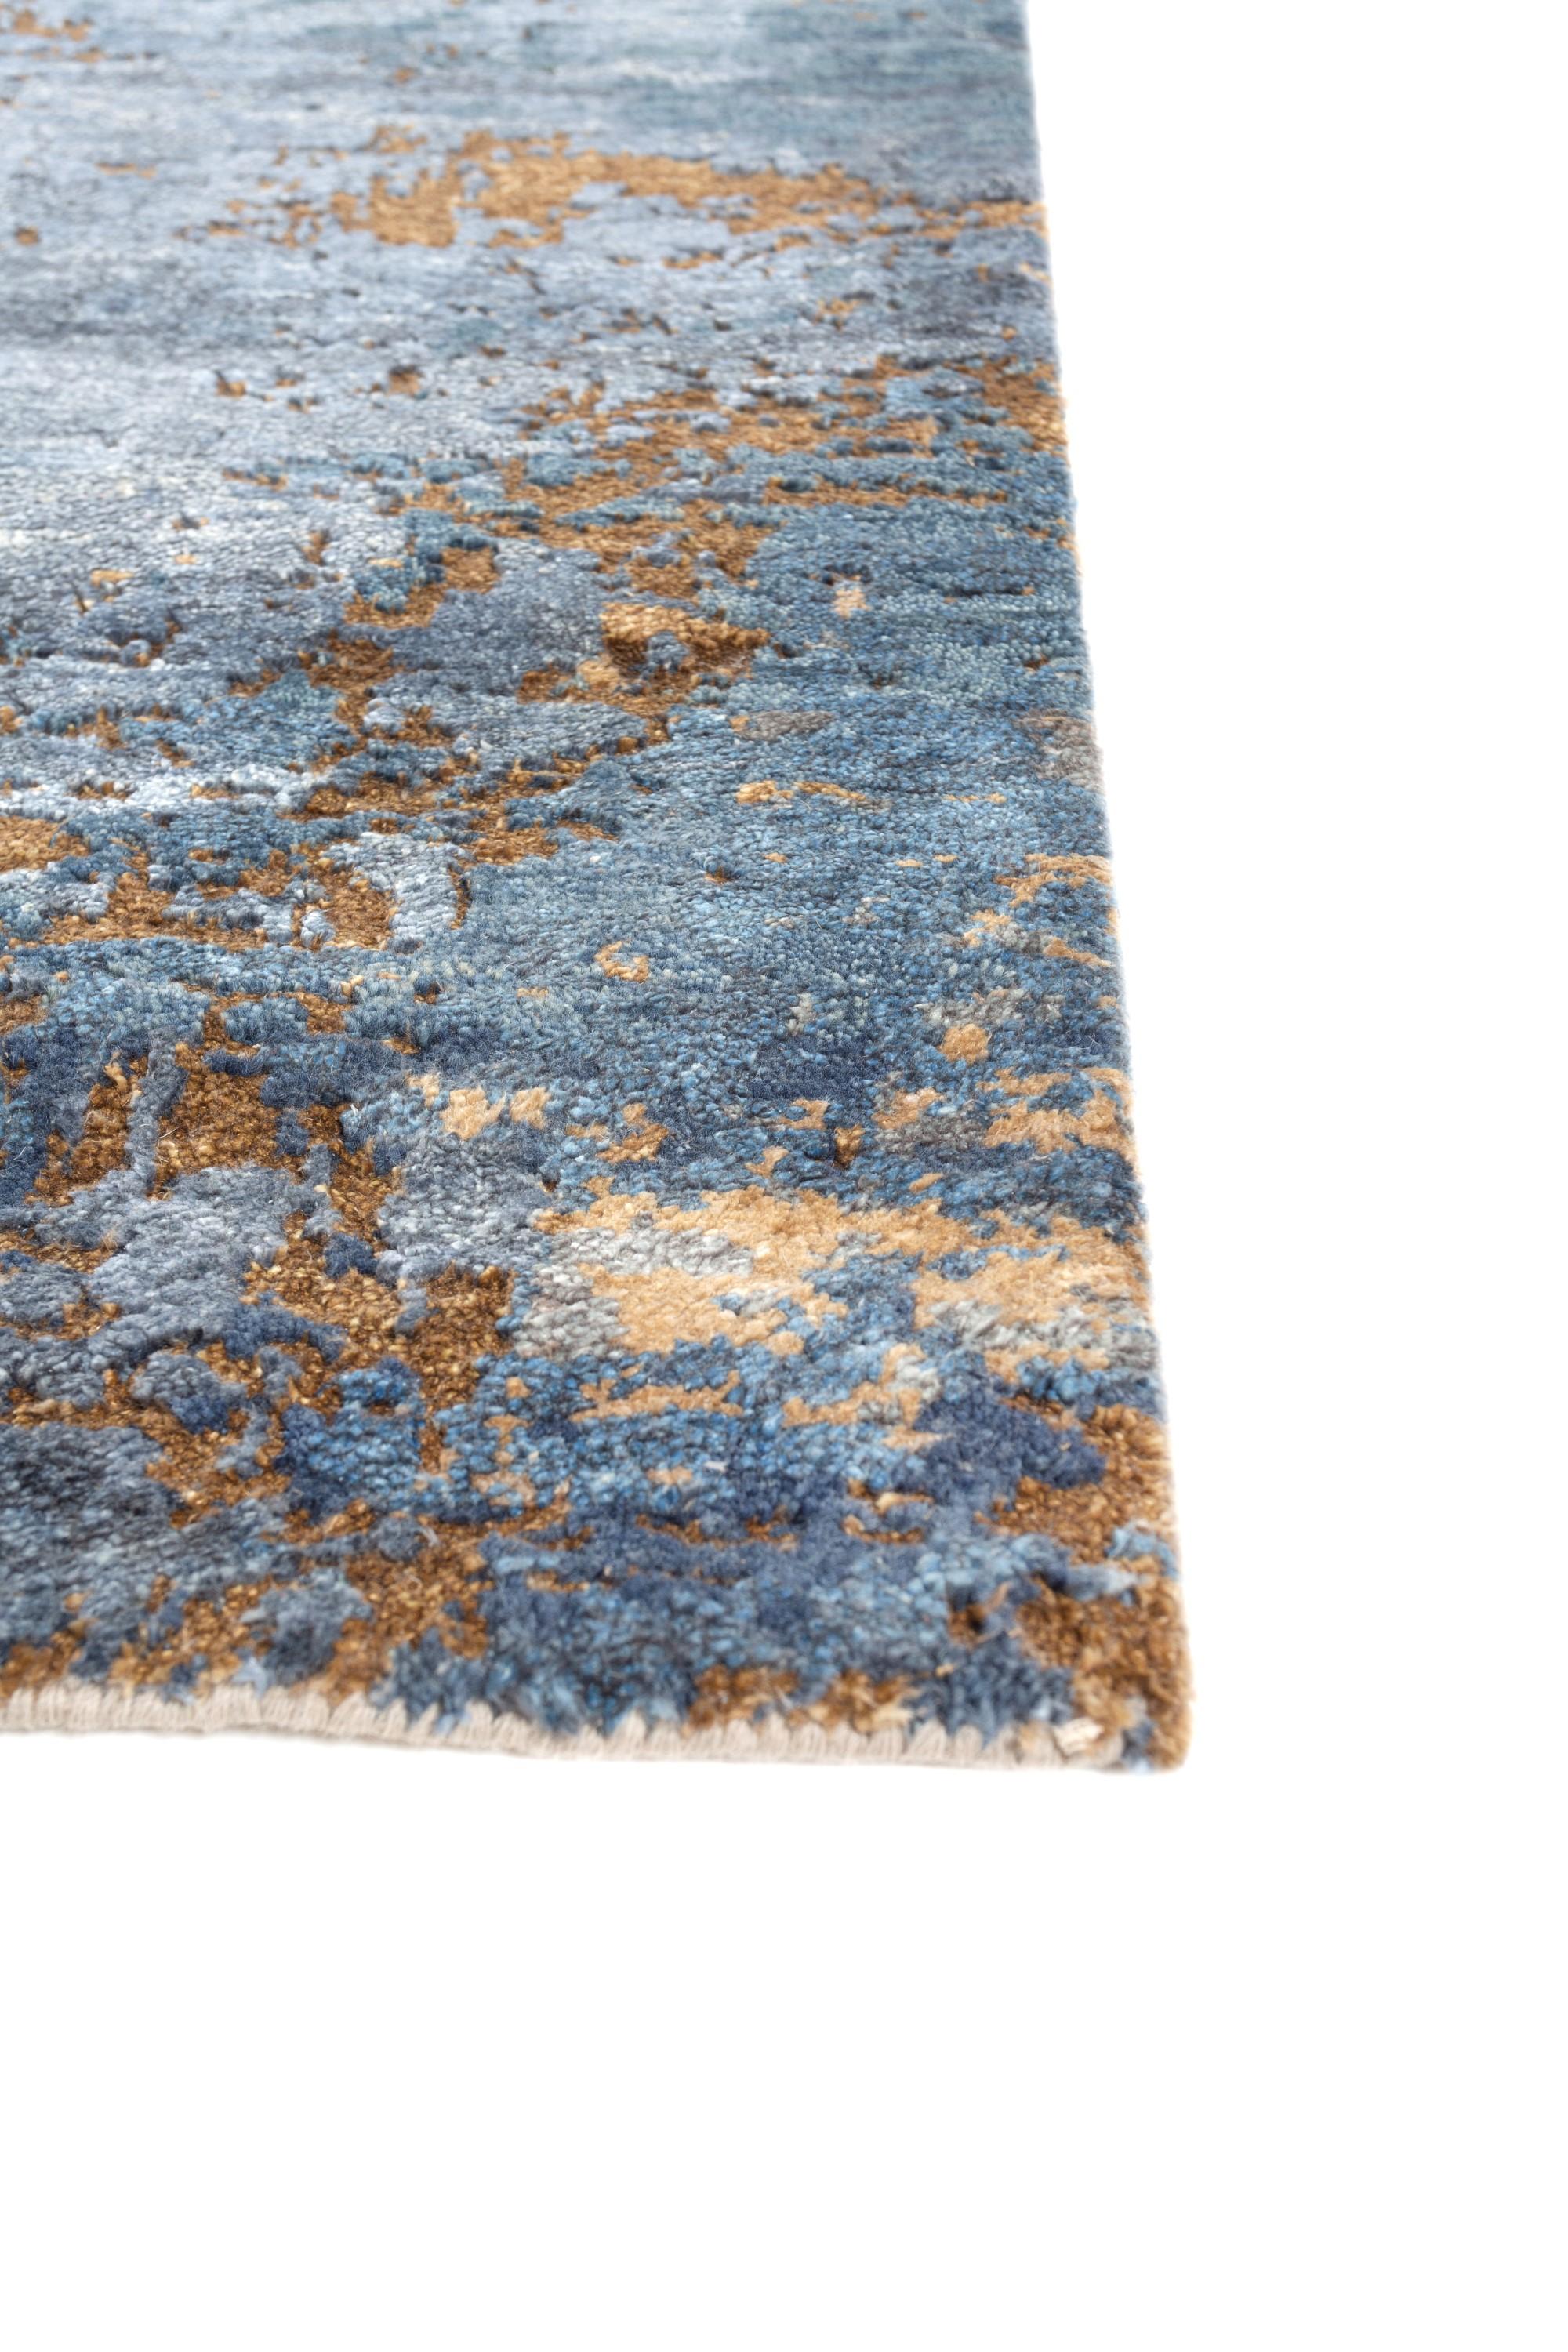 In the ebb and flow of civilizations, find peace in disorder with this hand-knotted rug  that mirrors the gradual decline to chaos. Within its intricate patterns lies a hypnotic sense of calm and peace. Handmade in rural India, this modern rug is a